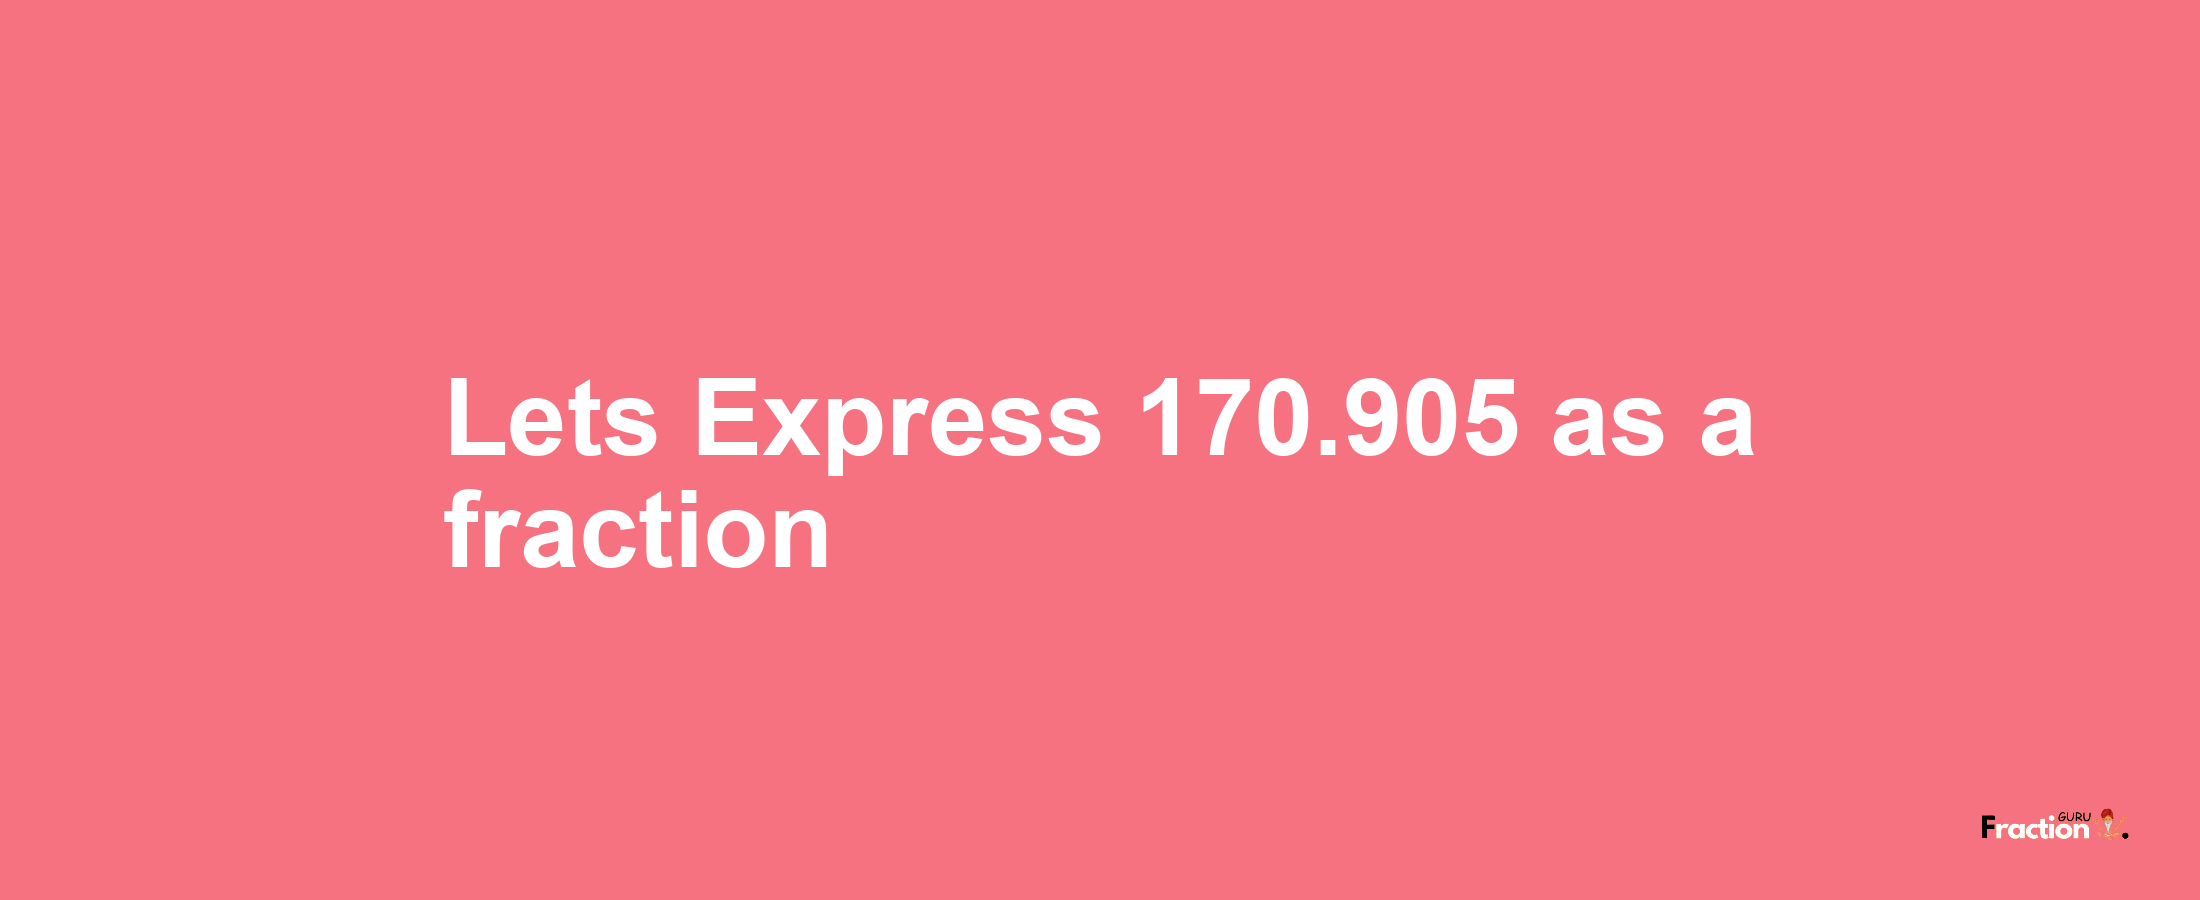 Lets Express 170.905 as afraction